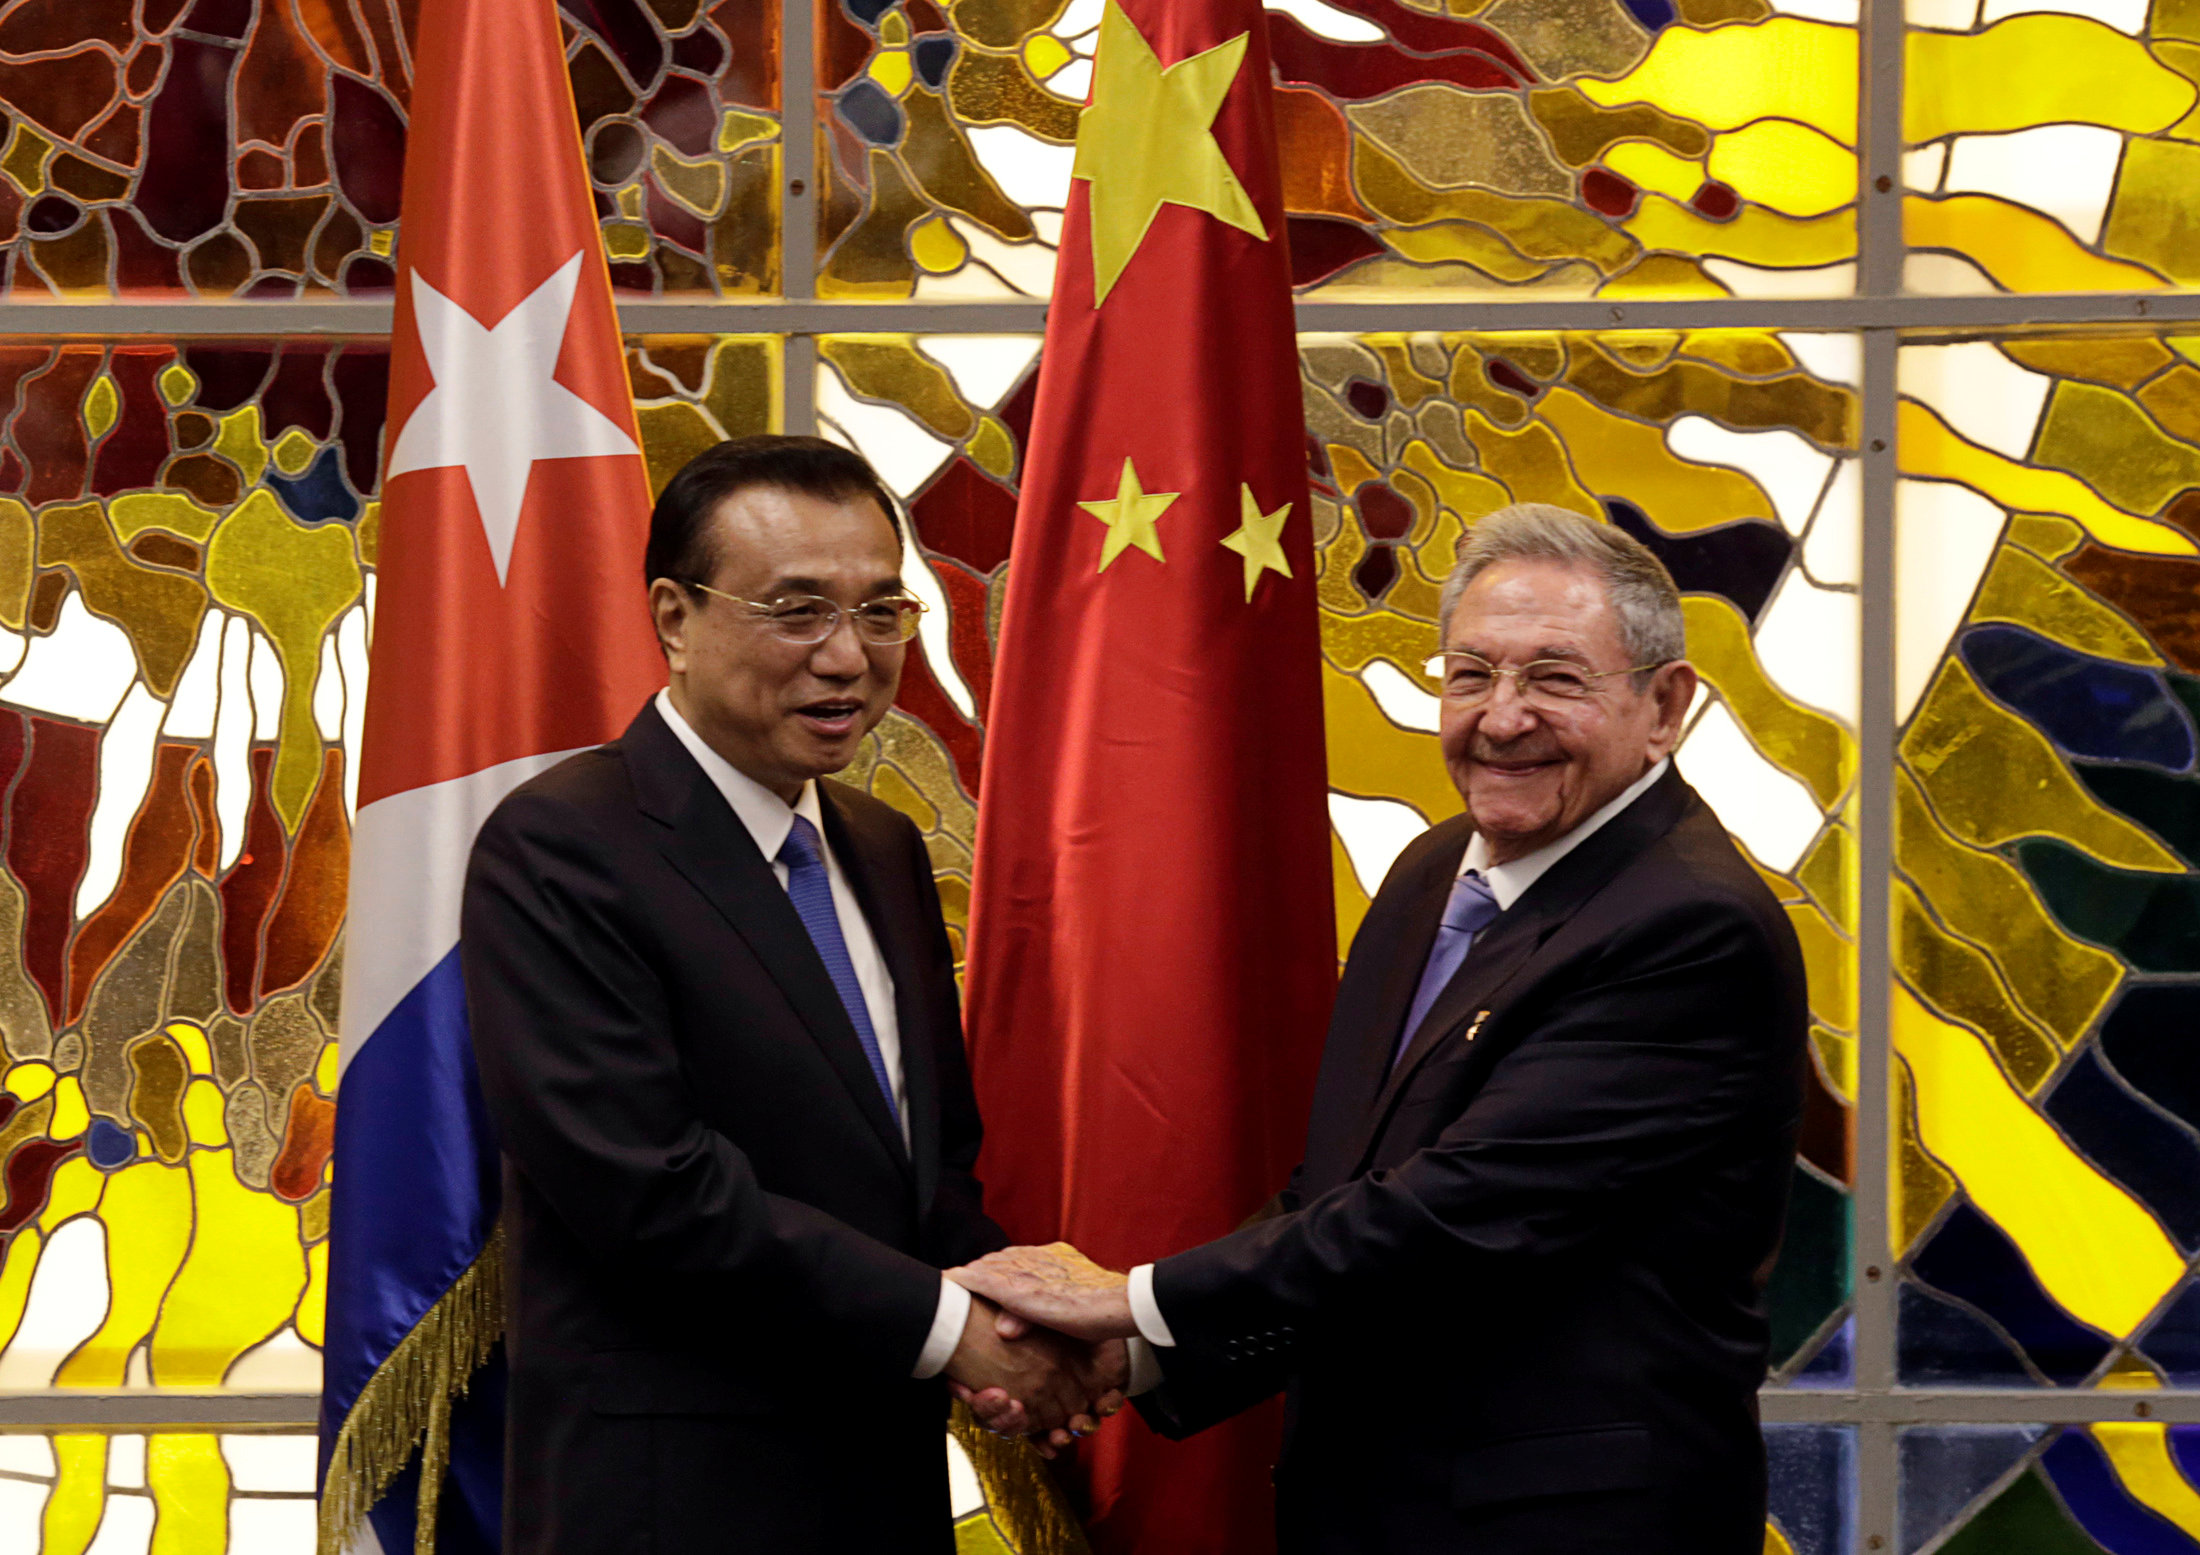 Chinese Premier Li Keqiang and Cuban President Raul Castro meet at Havana's Revolution Palace on Saturday. | REUTERS